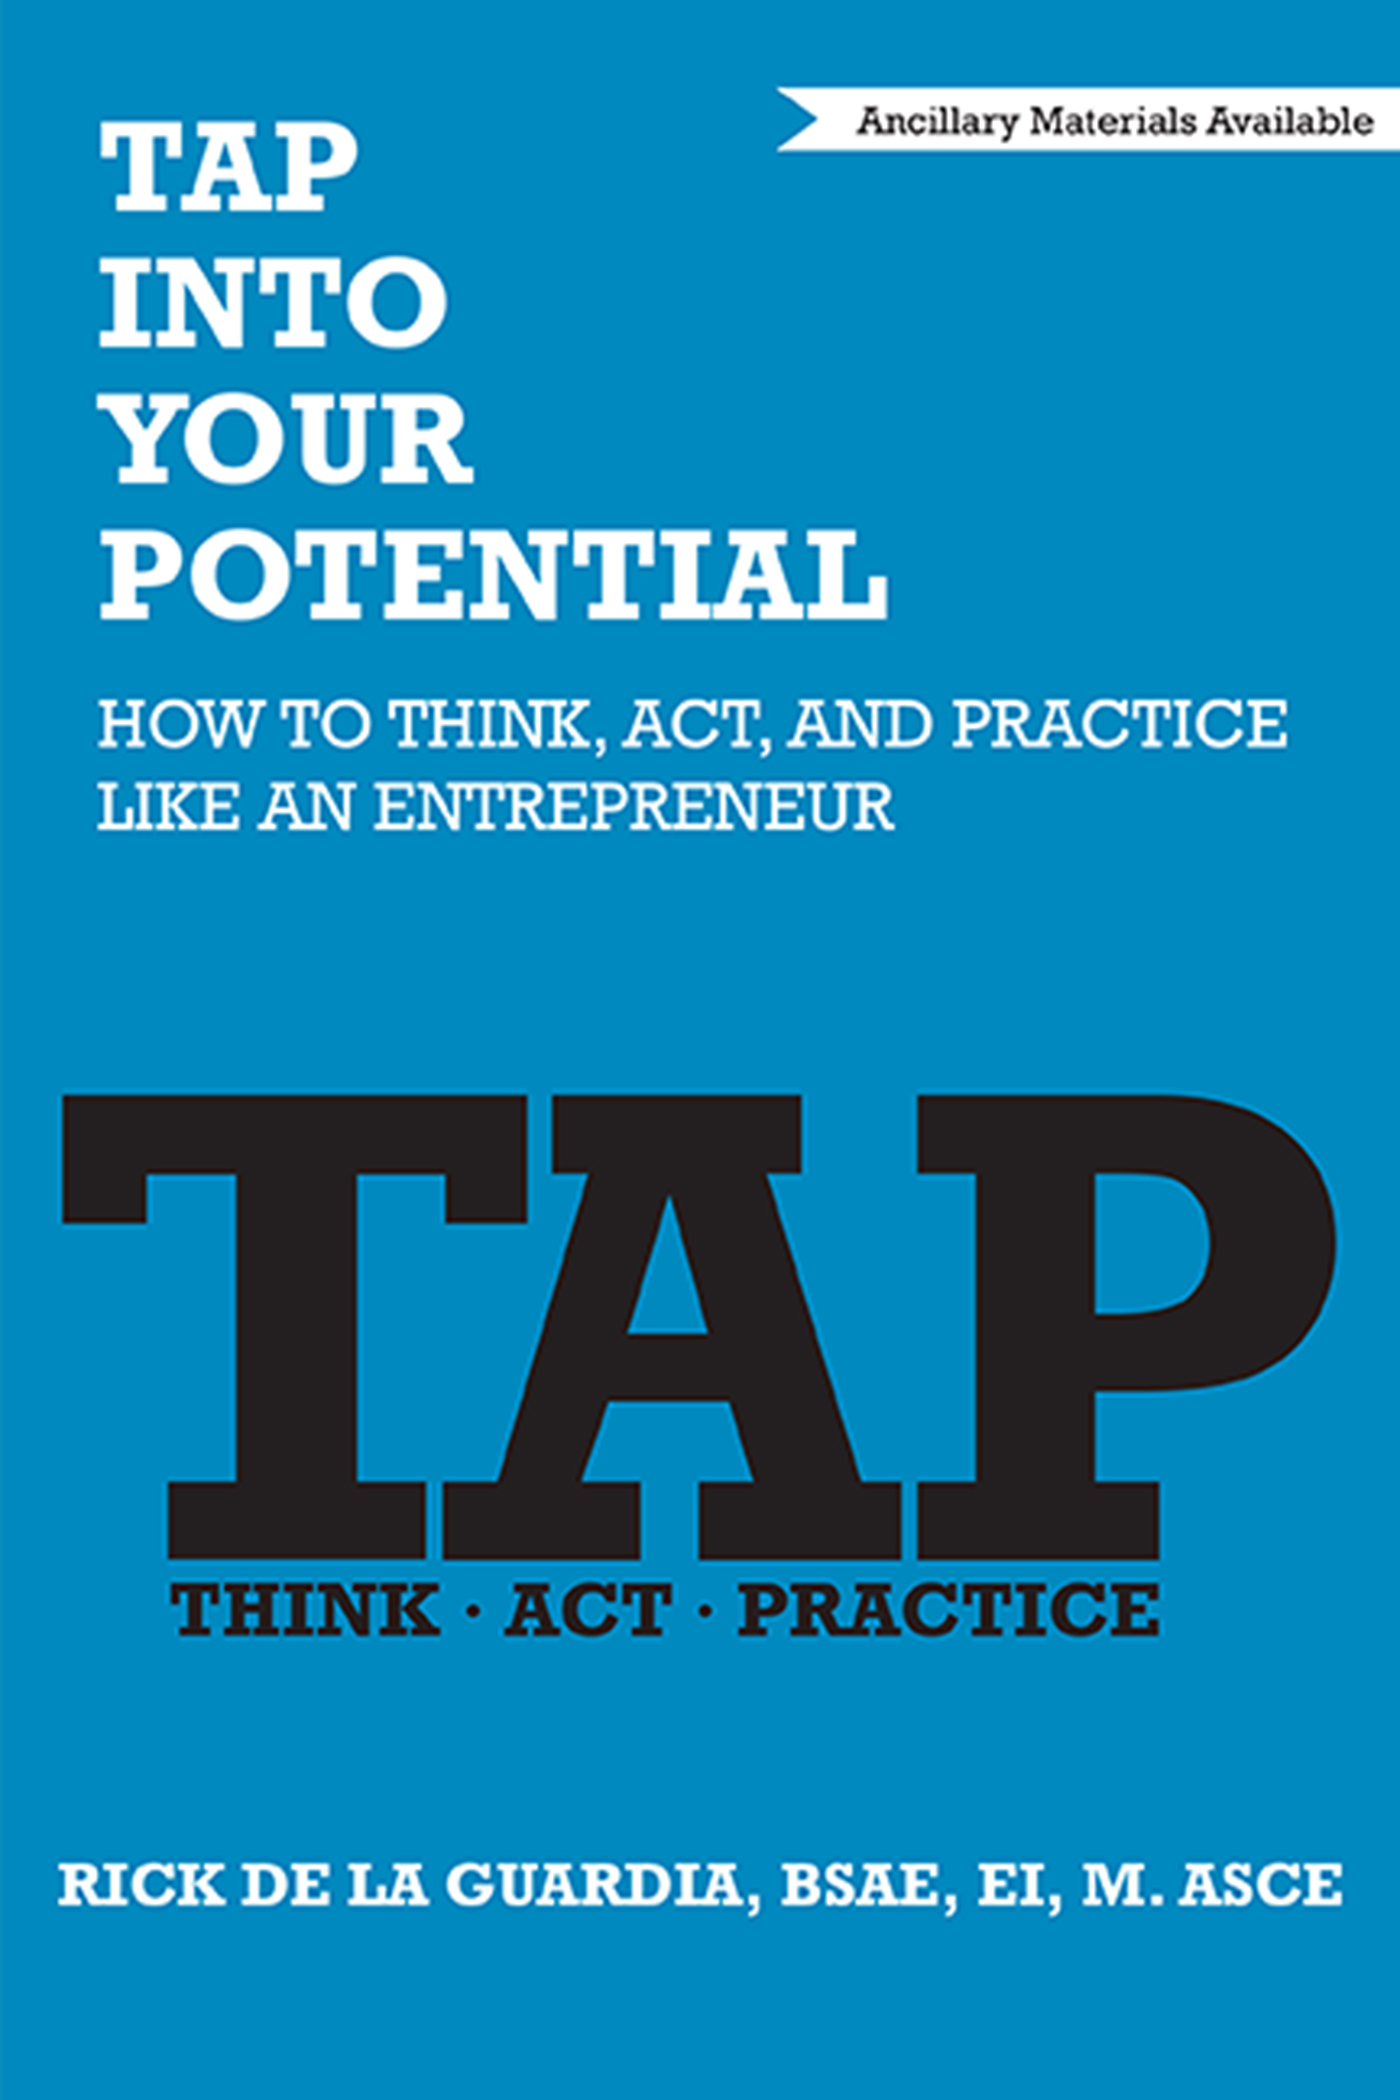 TTAP Into Your Potential: How to Think, Act, and Practice Like an Entrepreneur